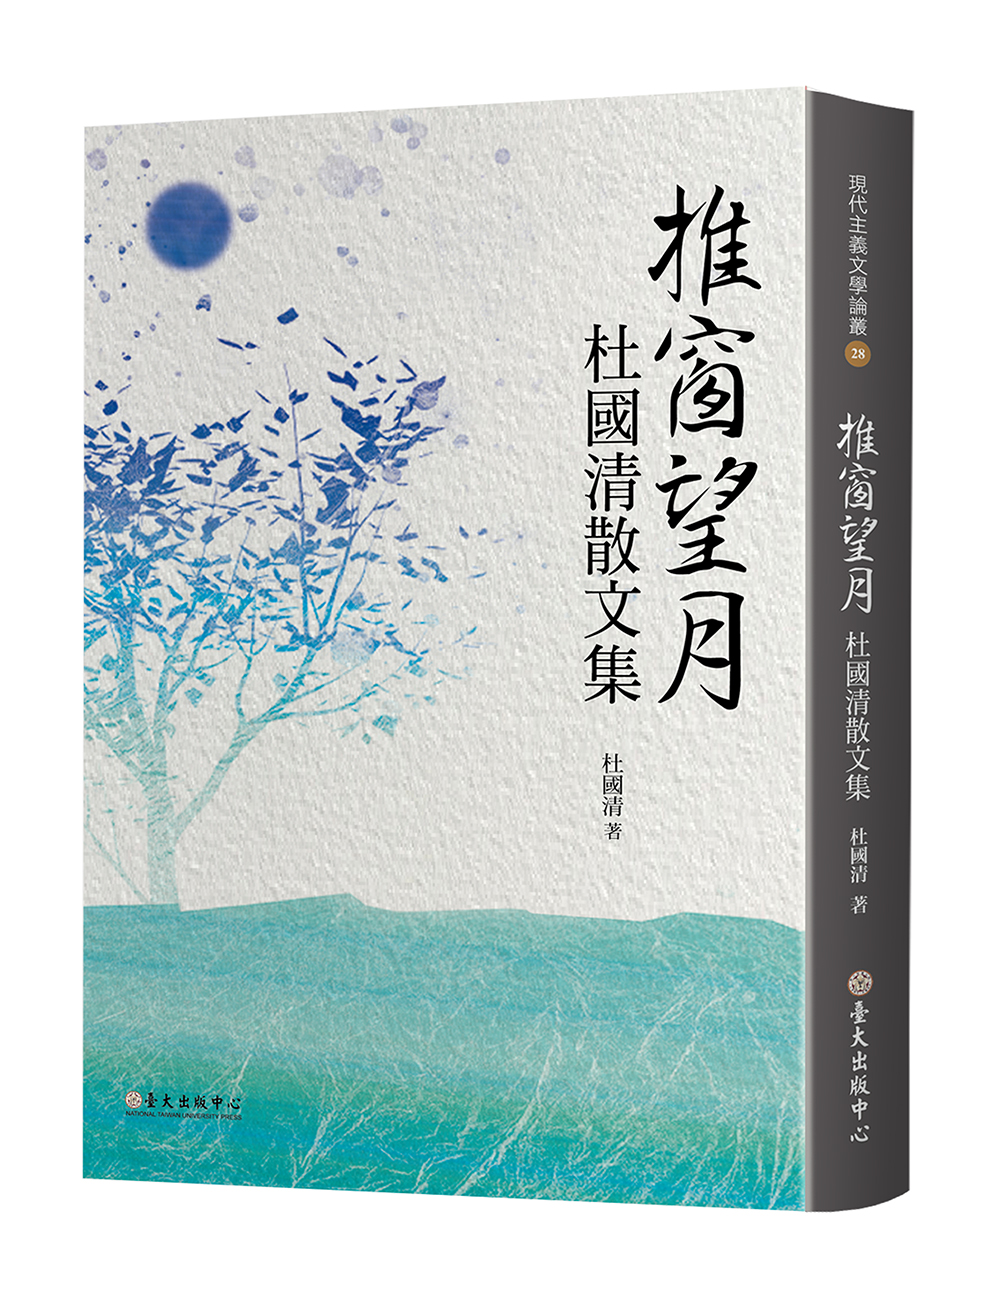 Pushing Open the Window, Gazing at the Moon: Collected Essays of Tu Kuo-ch'ing